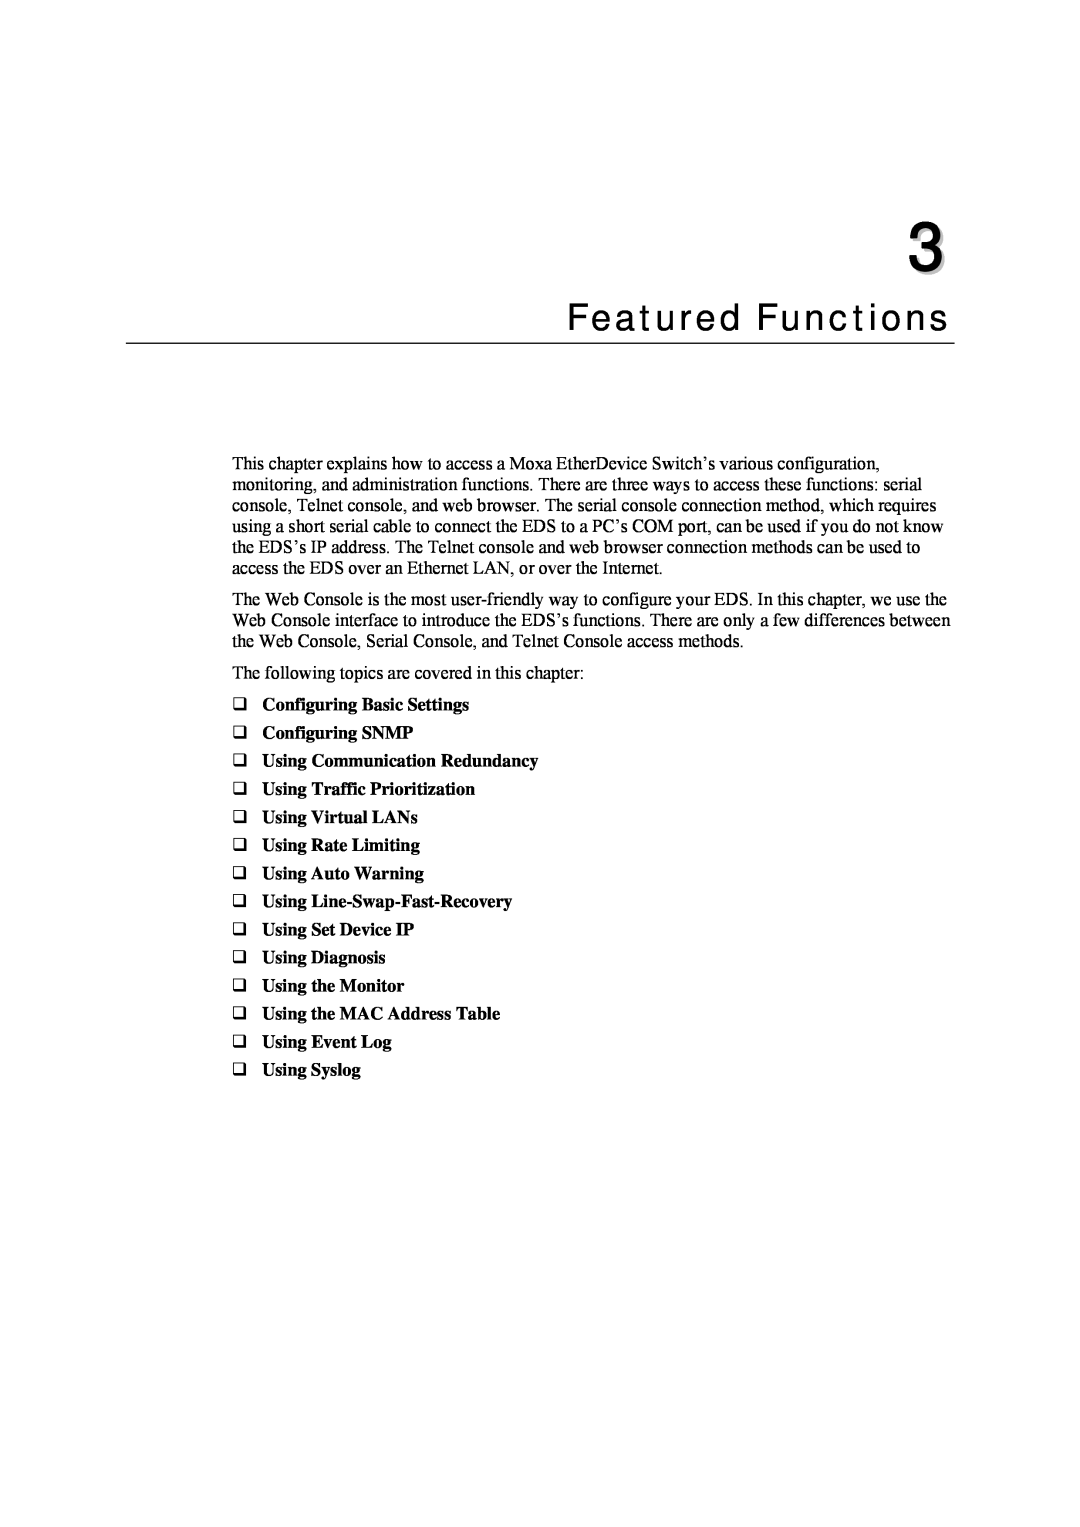 Moxa Technologies EDS-408A, EDS-405A user manual Featured Functions, ‰ Configuring Basic Settings ‰ Configuring SNMP 